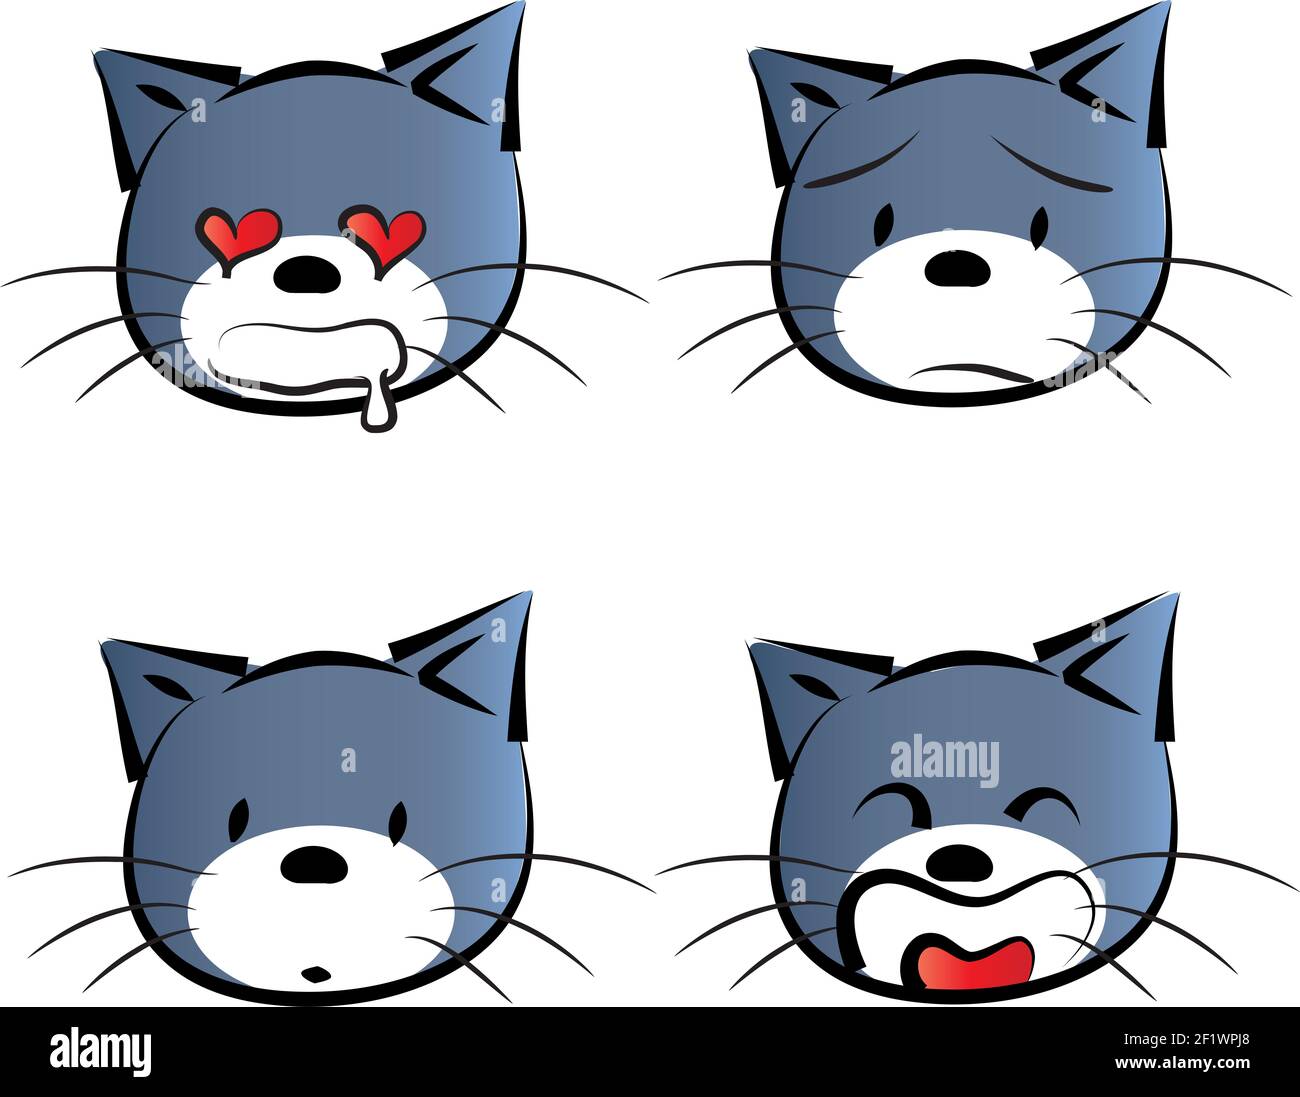 Cat Set Emoji Avatar Sad And Angry Face Guilty And Sleeping Pet Sleeping  Emotion Face Kitty Eggplant Vector Illustration Stock Illustration -  Download Image Now - iStock